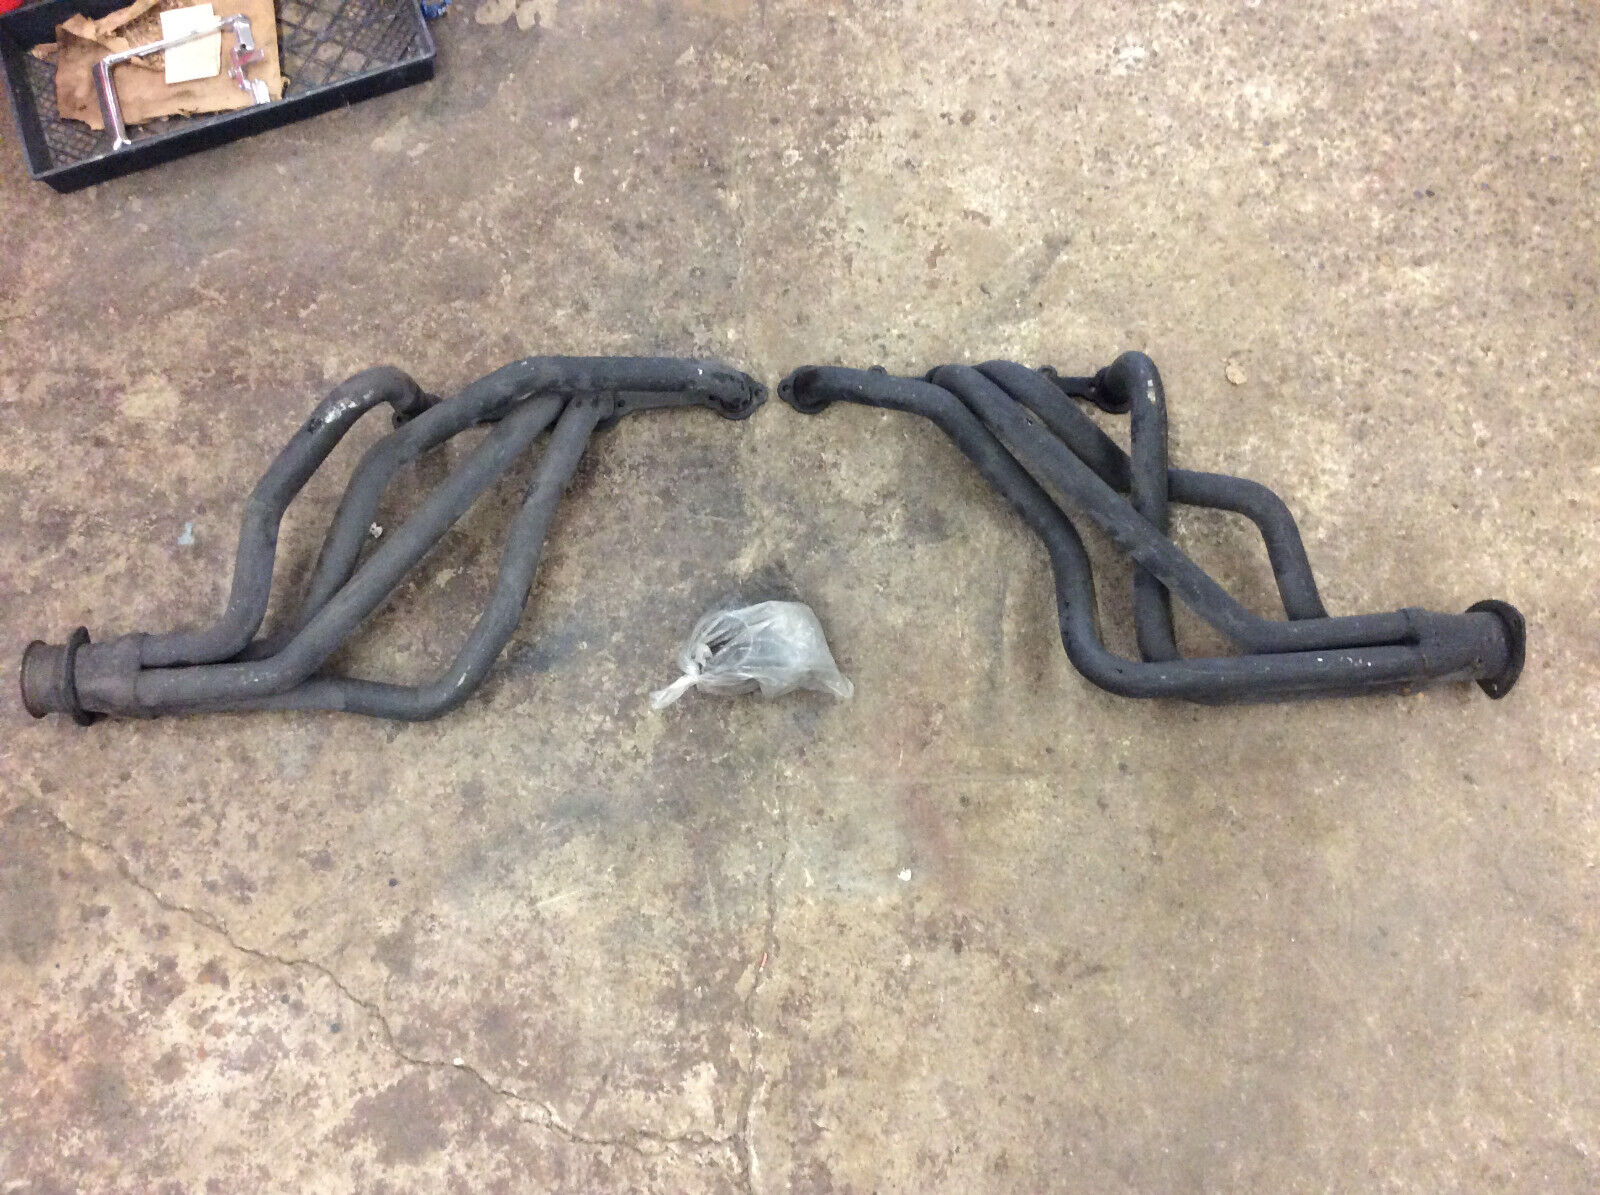 NEW Pair G Body Buick Regal Exhaust Headers JEGS? Summit?